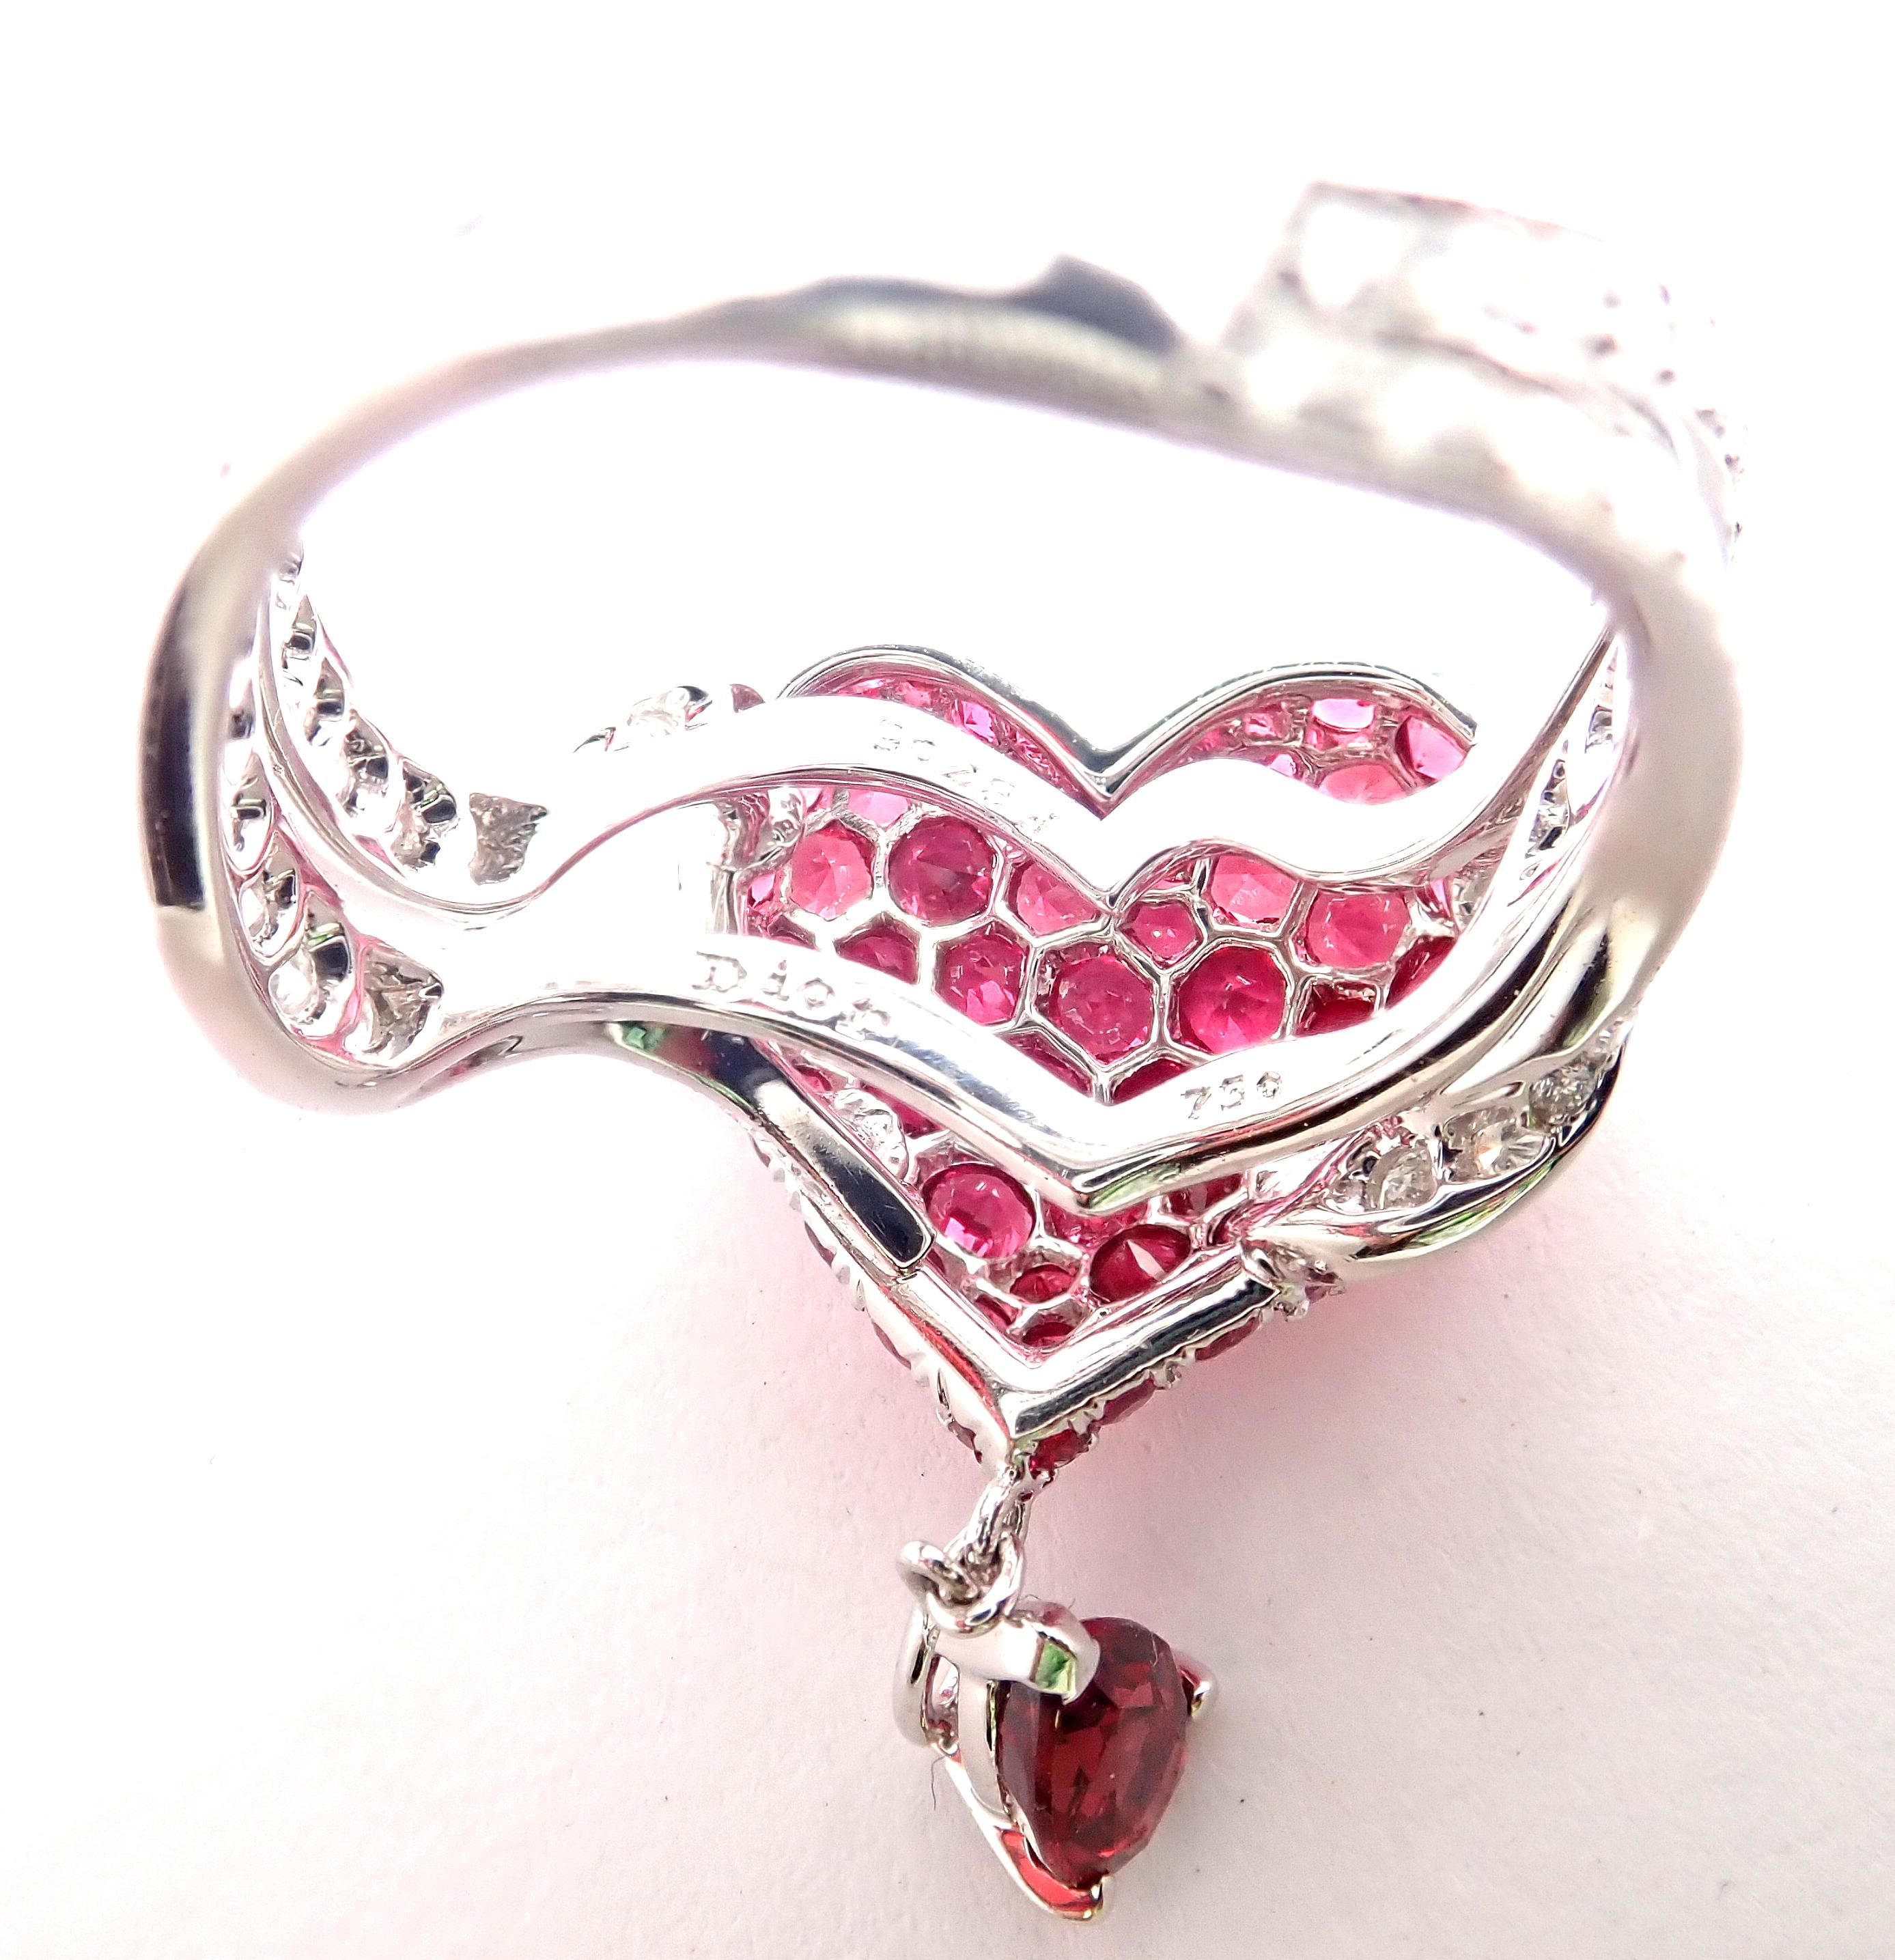 Brilliant Cut Christian Dior Cupidon Diamond Ruby Red Spinel Heart Ring